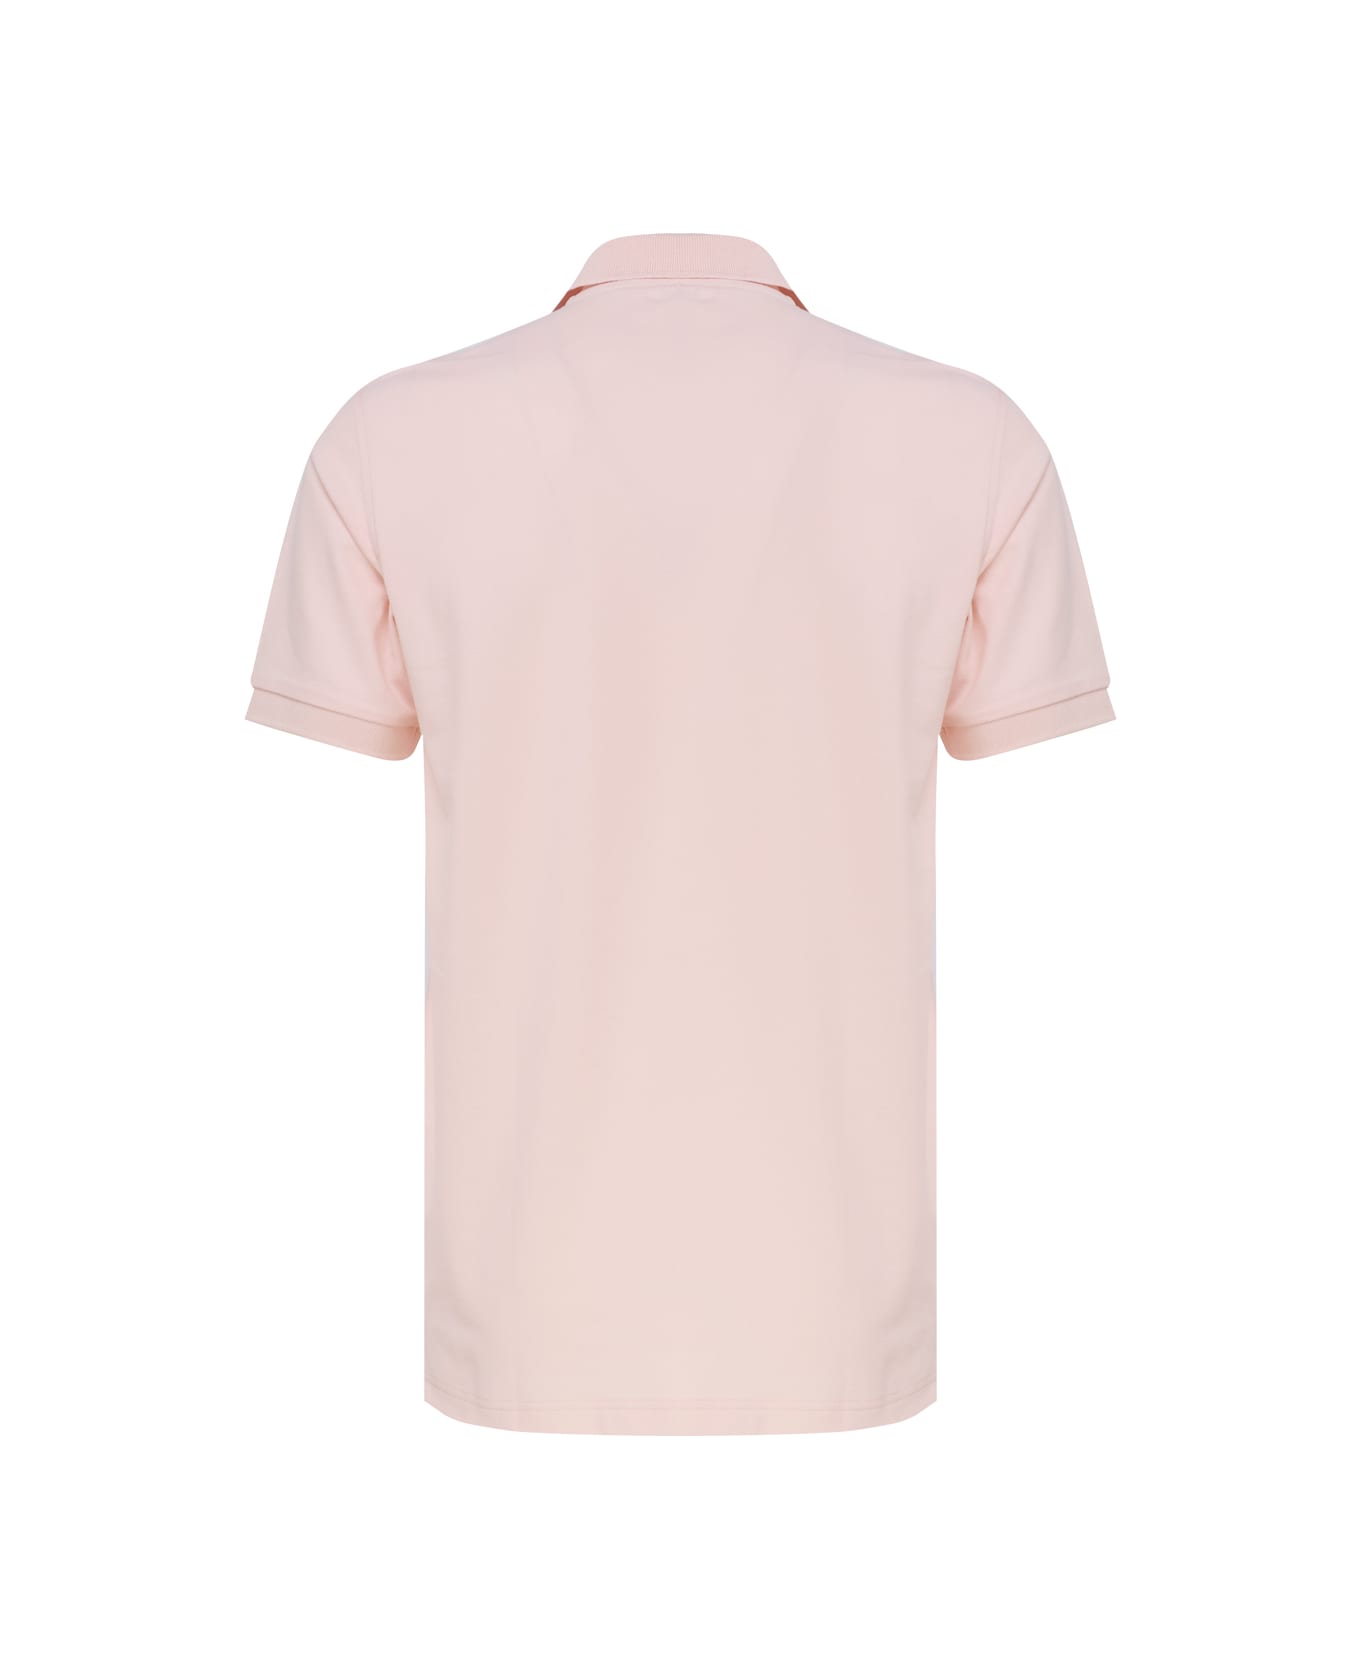 Sun 68 Polo T-shirt In Cotton - Pink ポロシャツ